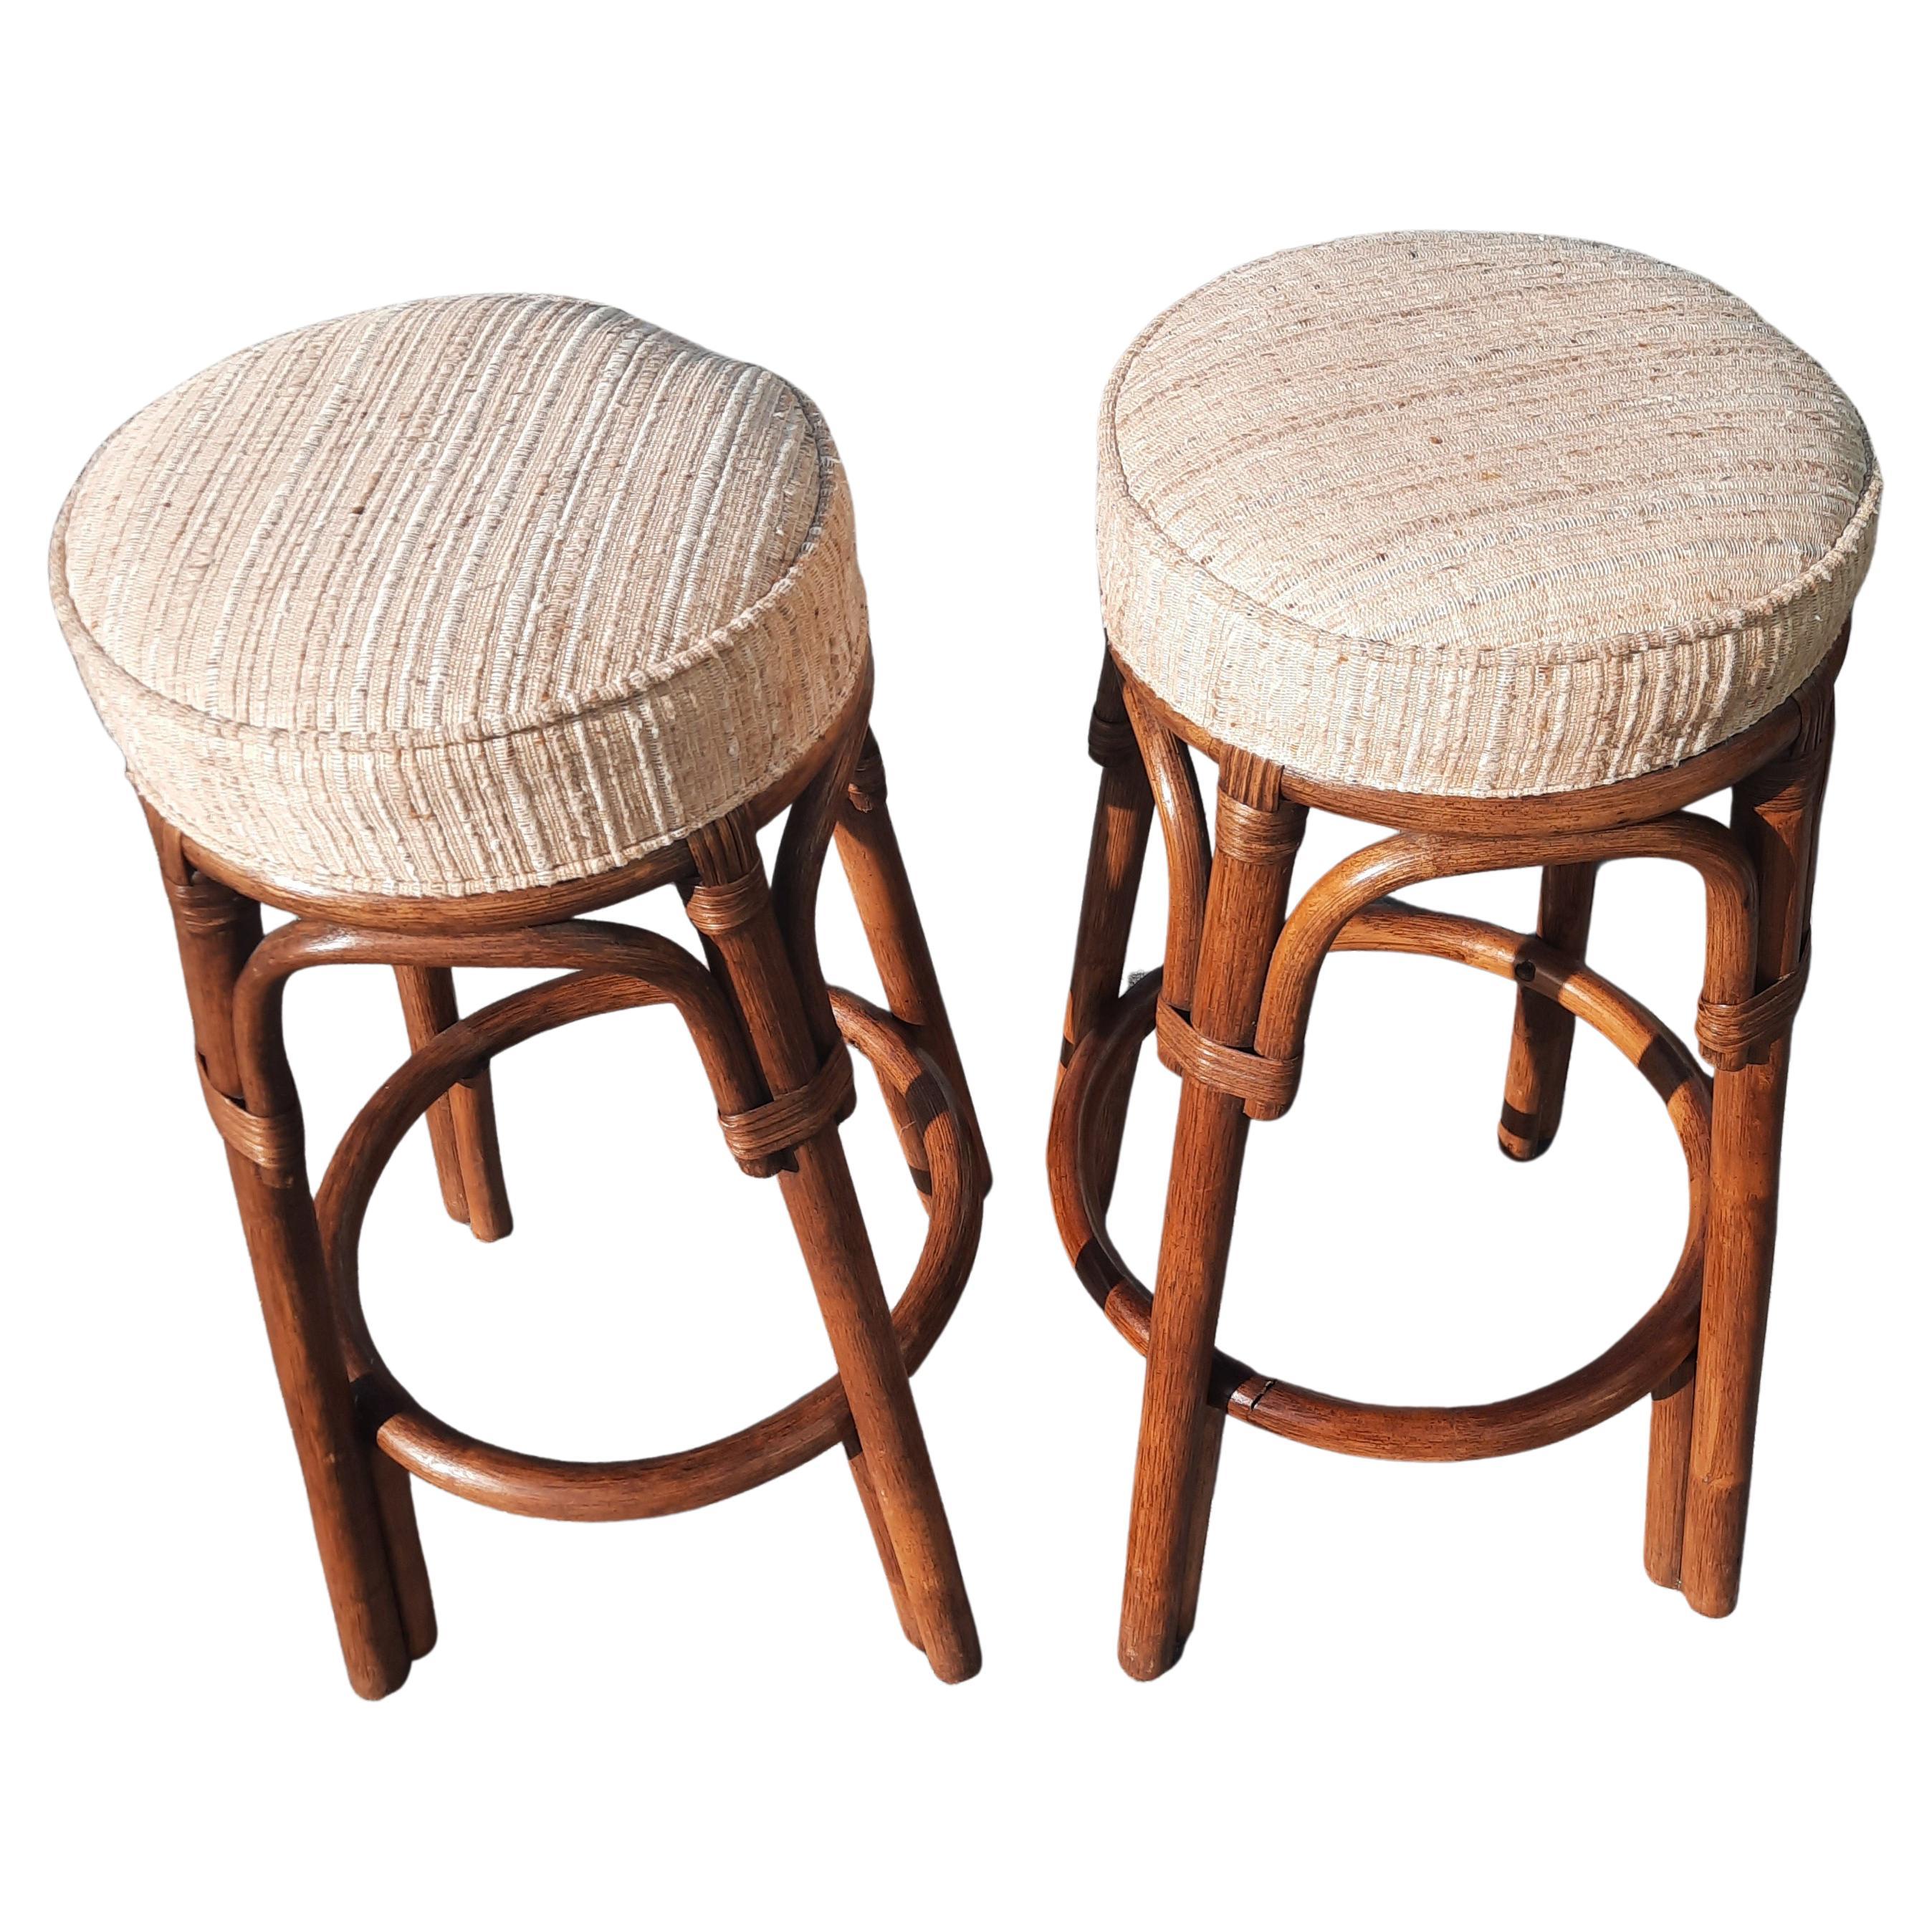 Stacked Rattan and Woven Wicker Bar and Stools Set, circa 1970s 6